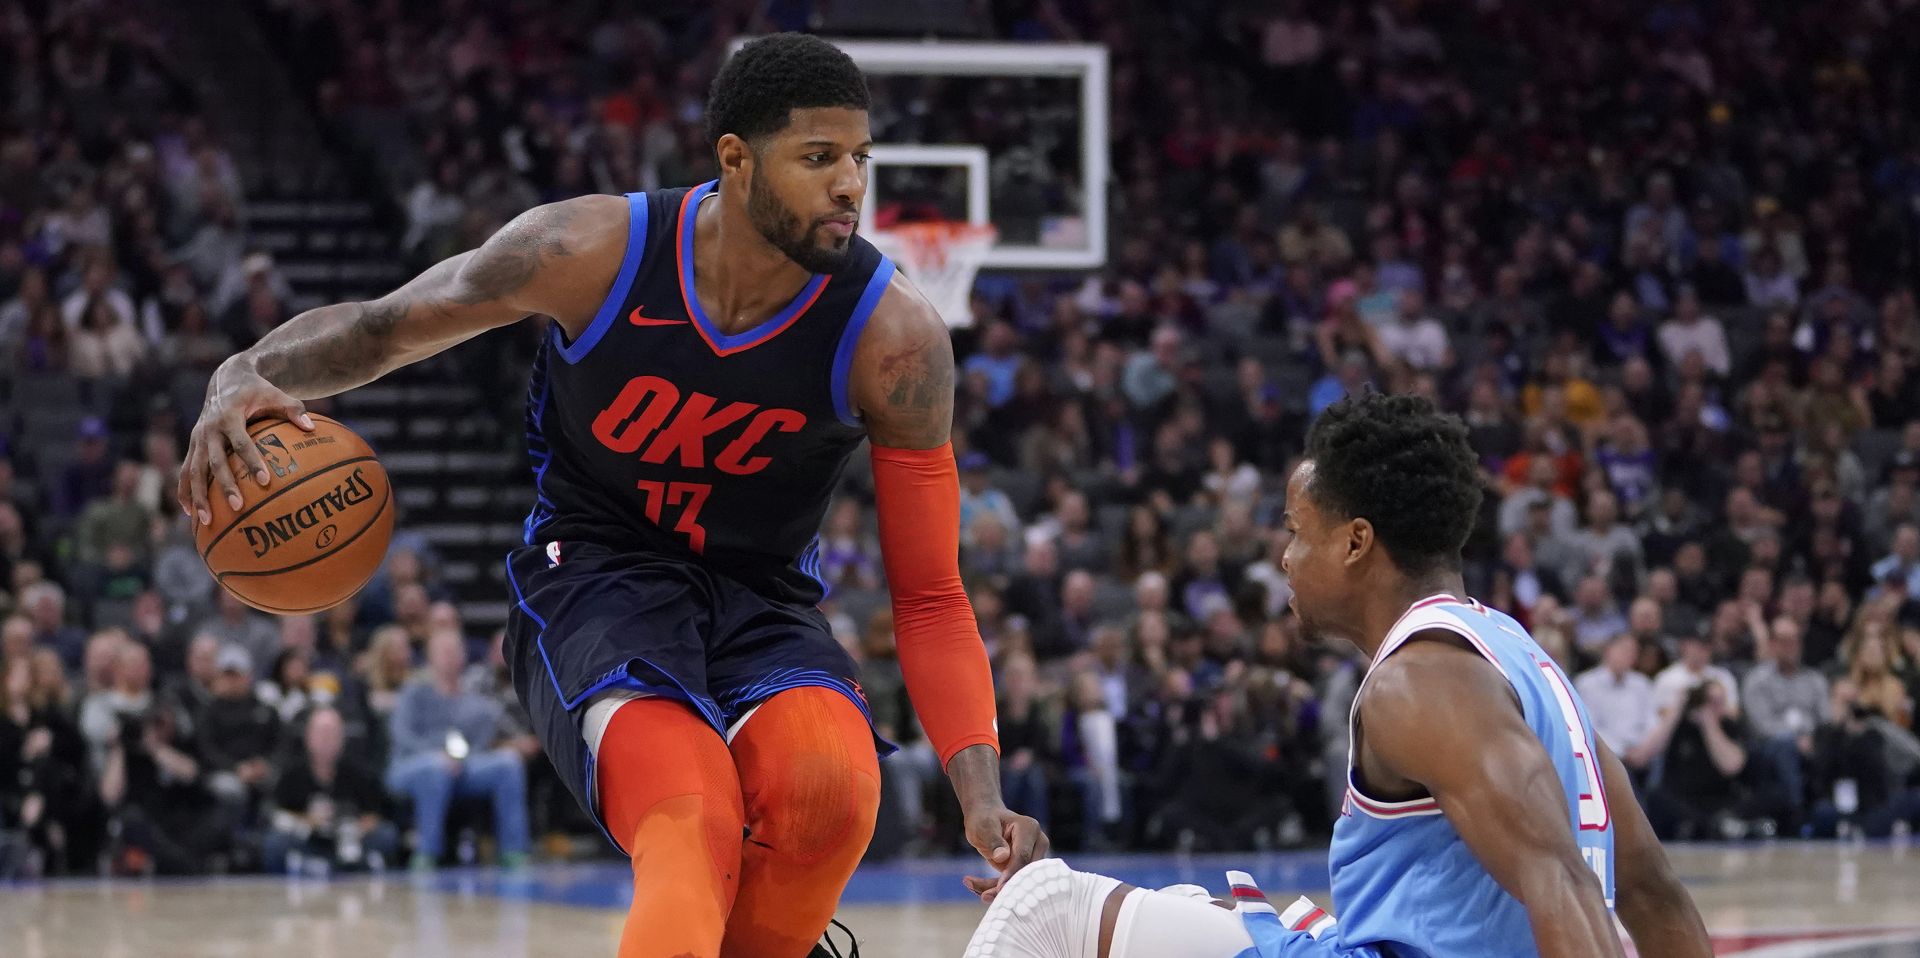 epa07241299 Oklahoma City Thunder forward Paul George (L) in action against Sacramento Kings guard Yogi Ferrell (R) during the second half of the NBA basketball game between the Oklahoma City Thunder and the Sacramento Kings at Golden 1 Center in Sacramento, California, USA, 19 December 2018.  EPA/JOHN G. MABANGLO SHUTTERSTOCK OUT